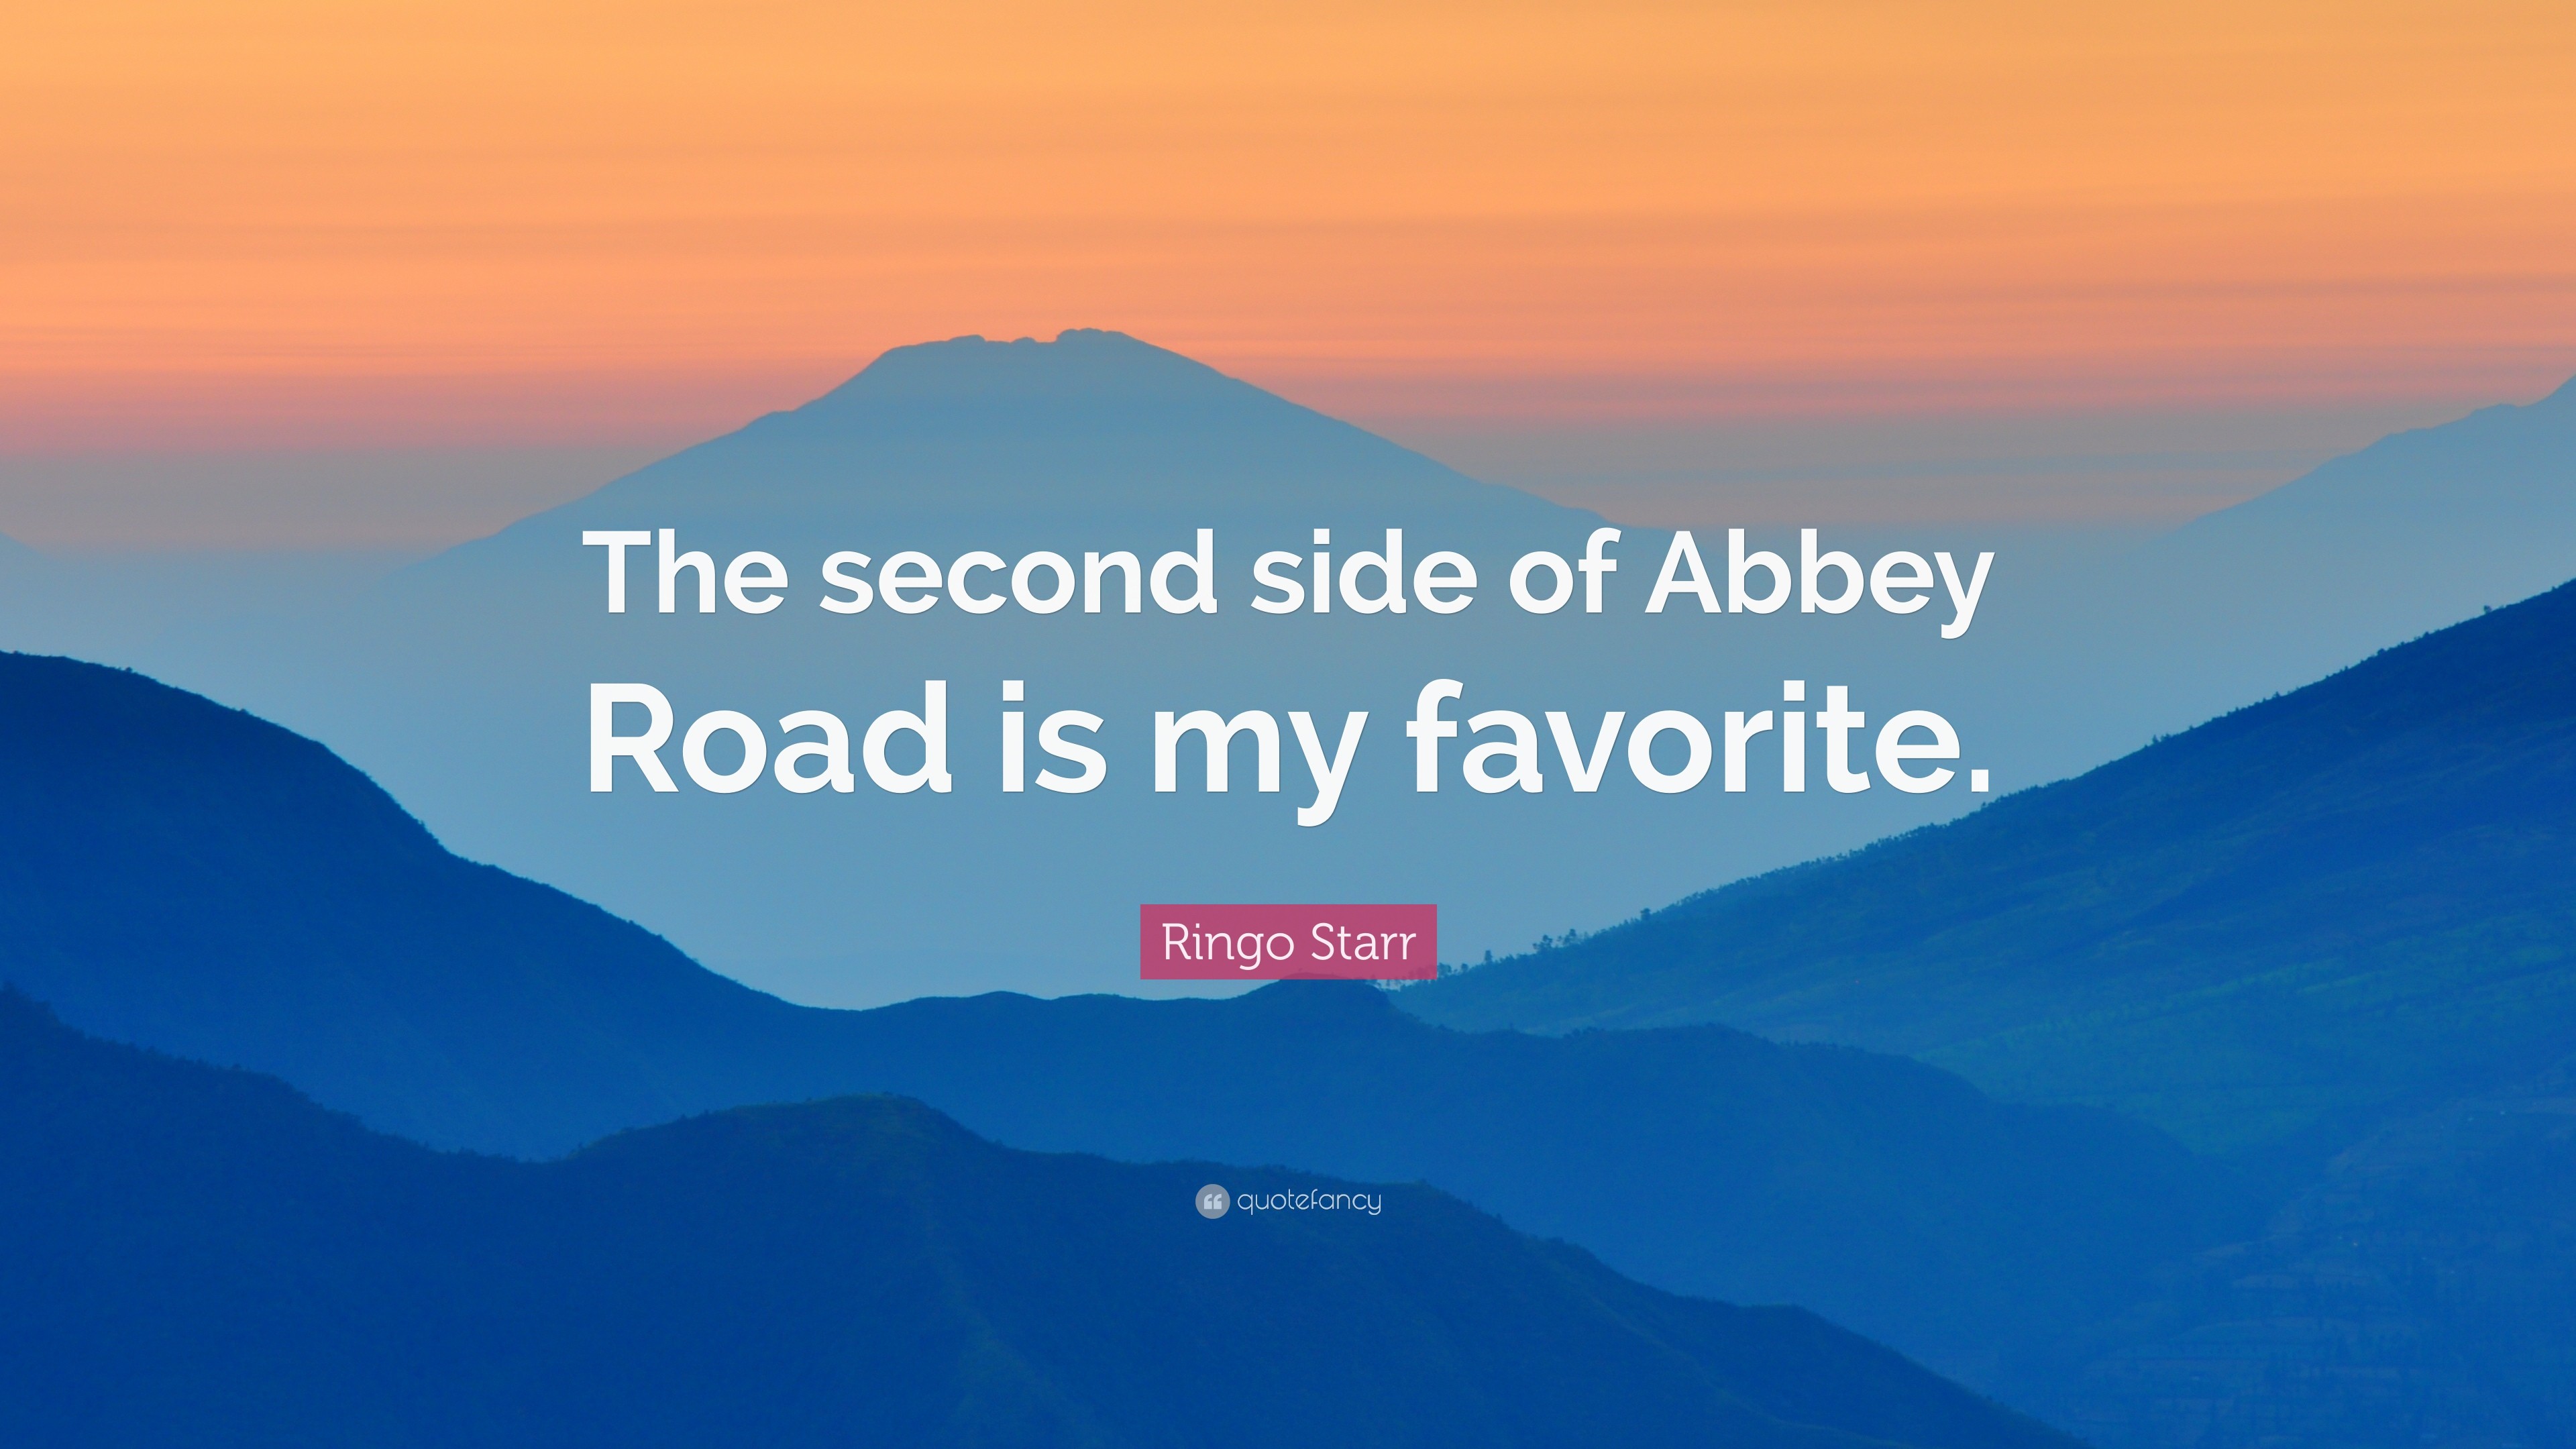 3840x2160 Ringo Starr Quote: “The second side of Abbey Road is my favorite.”